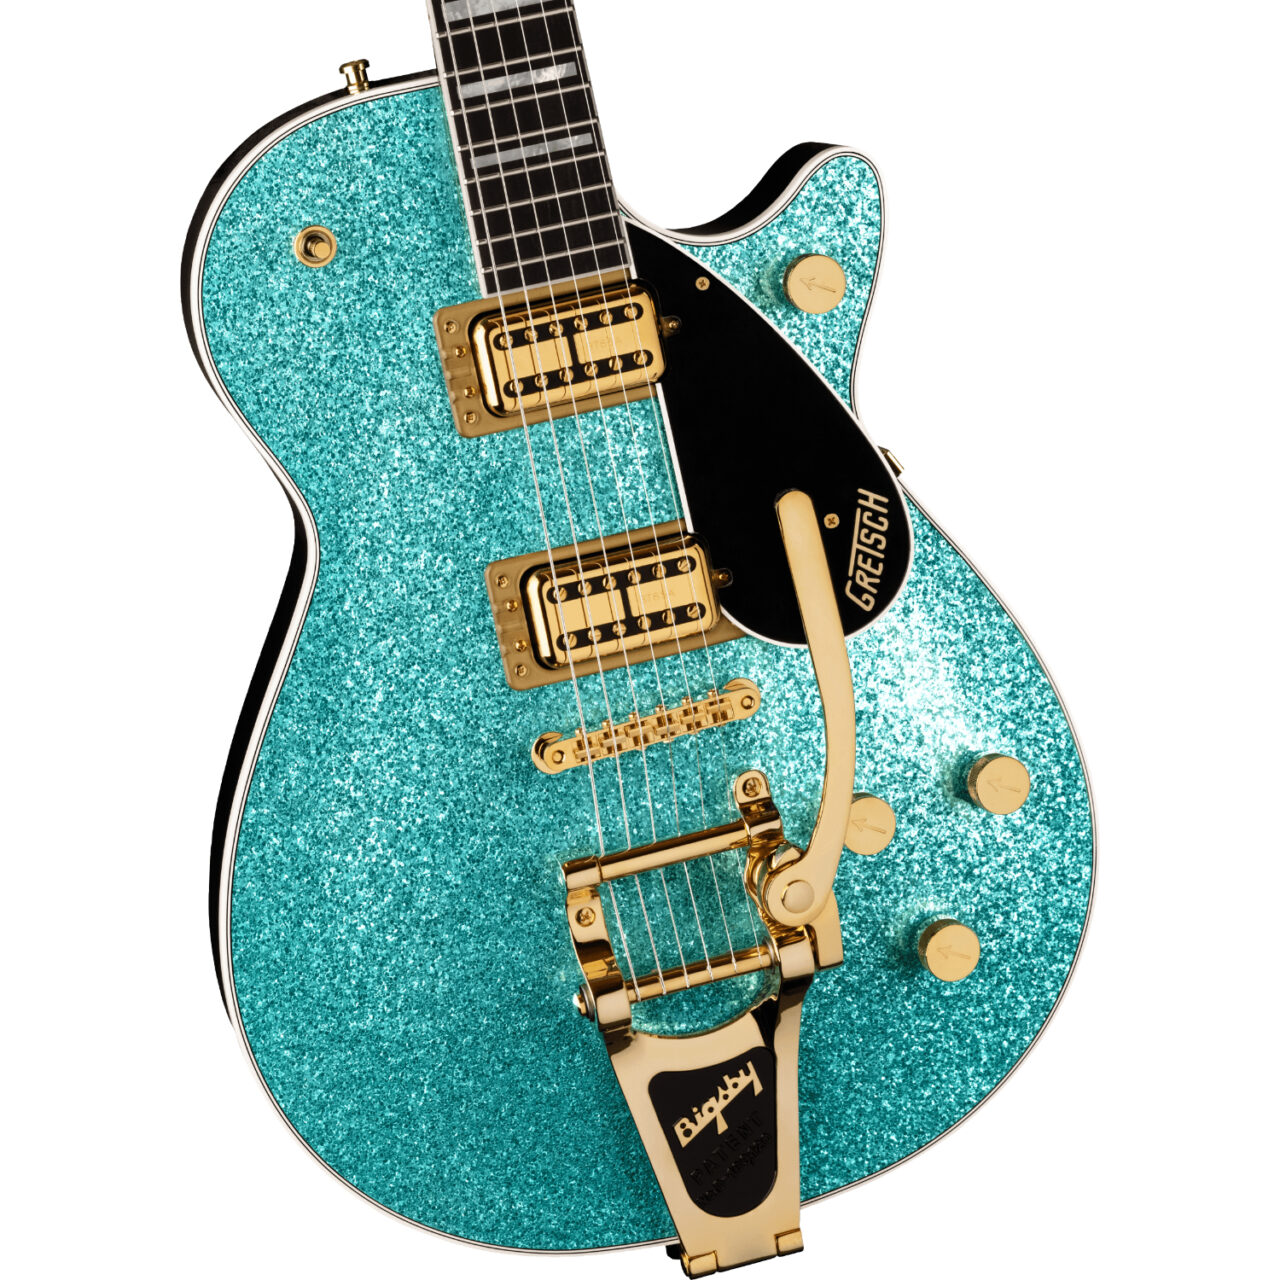 G6229TG Limited Edition Players Edition Sparkle Jet BT with Bigsby Ocean Turquoise Sparkle エレキギタートップ